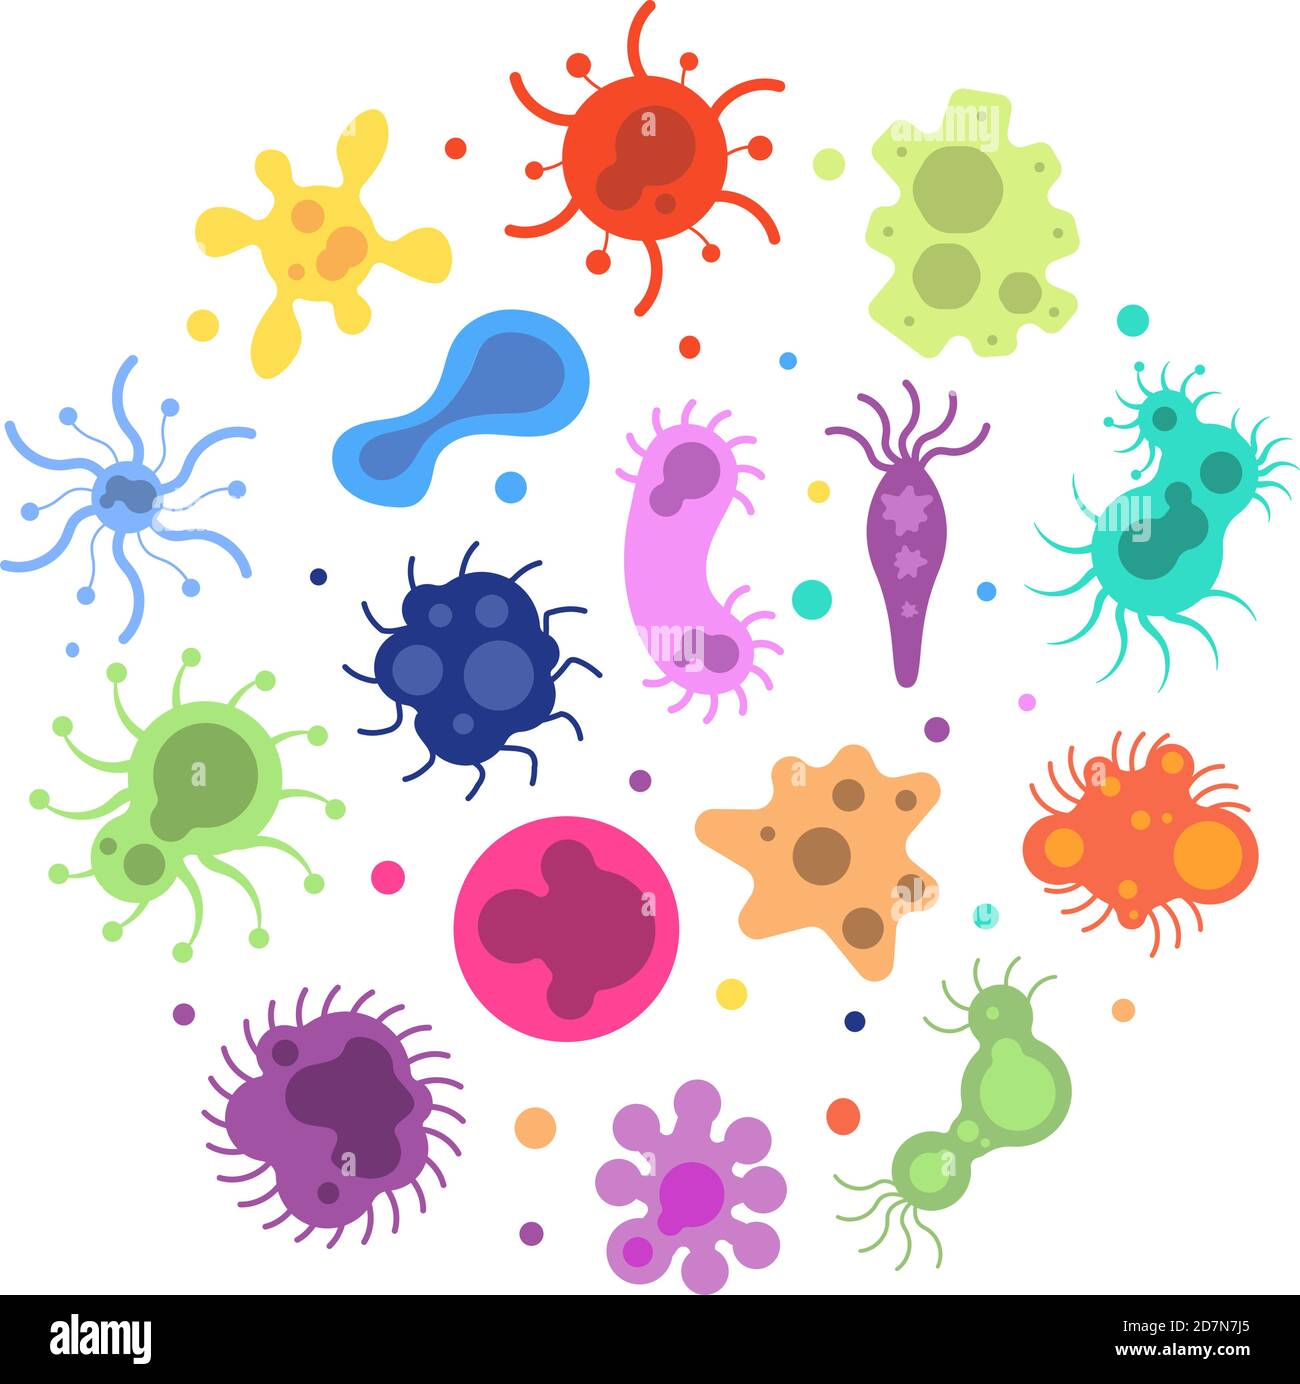 Bacteria germ. Pandemic viruses biological, allergy microbes bacteria epidemiology. Infection germs flu diseases vector colorful cells. Amoeba flu, cell illness infection illustration Stock Vector